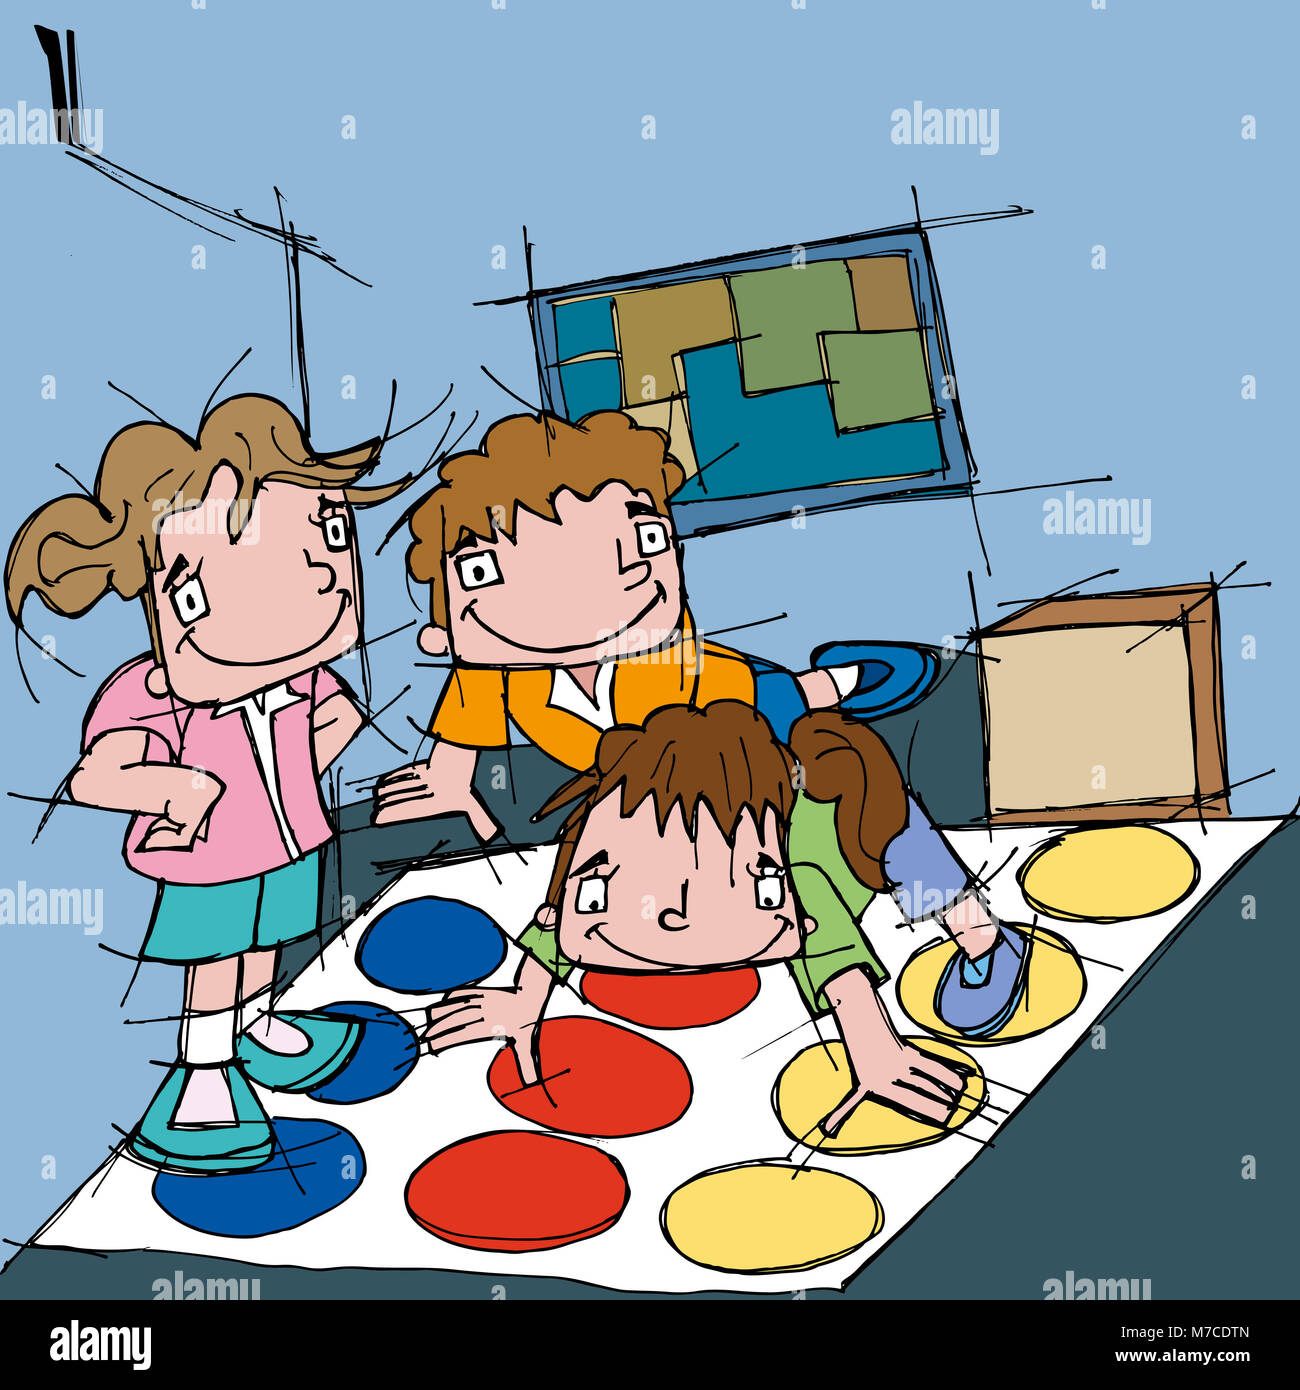 Three children playing connect the dots Stock Photo